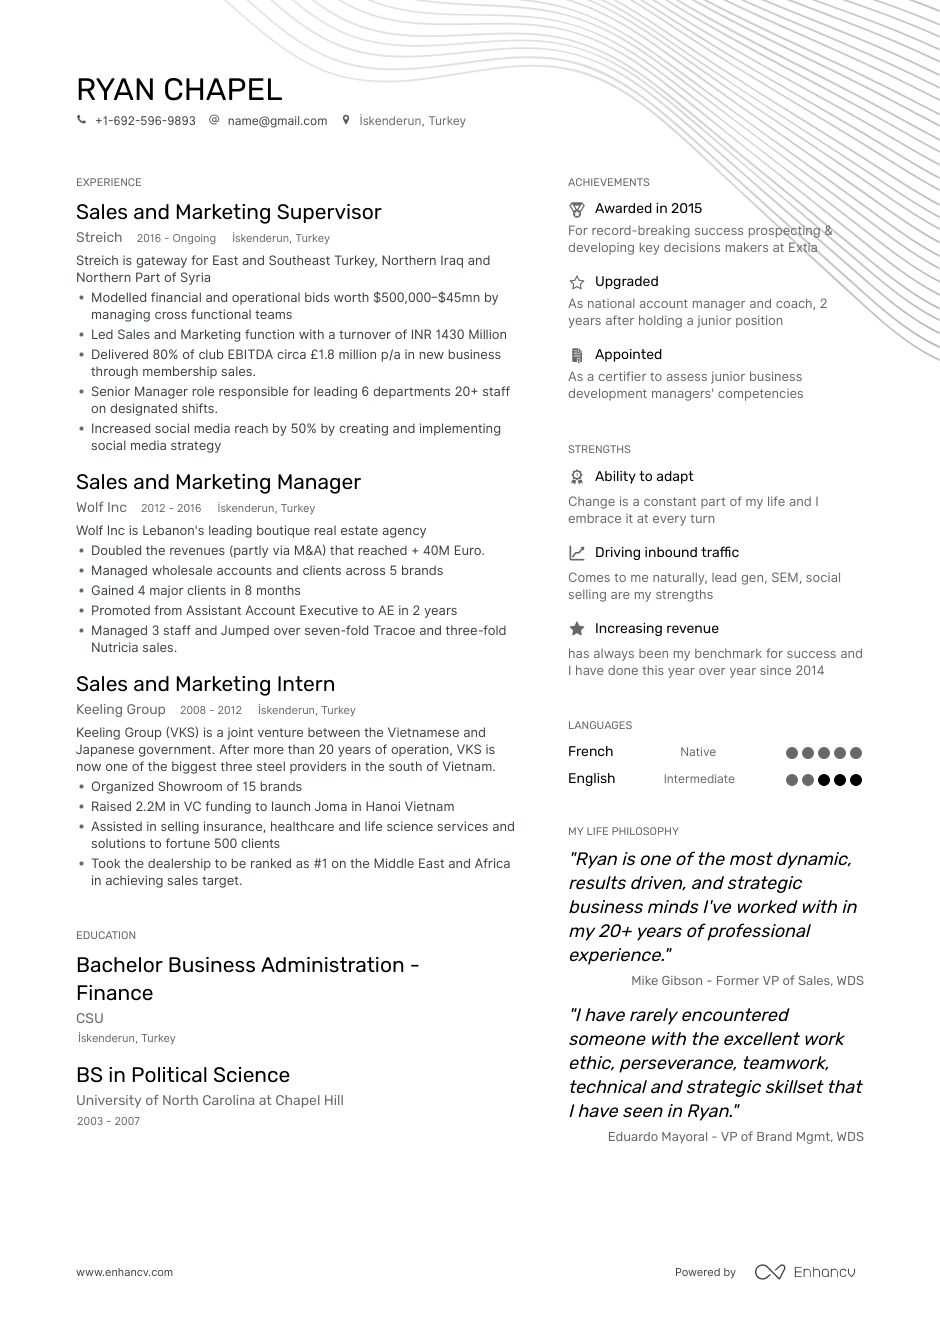 Sample Resume for Sales and Marketing Executive Job-winning Sales and Marketing Professional Resume Examples …